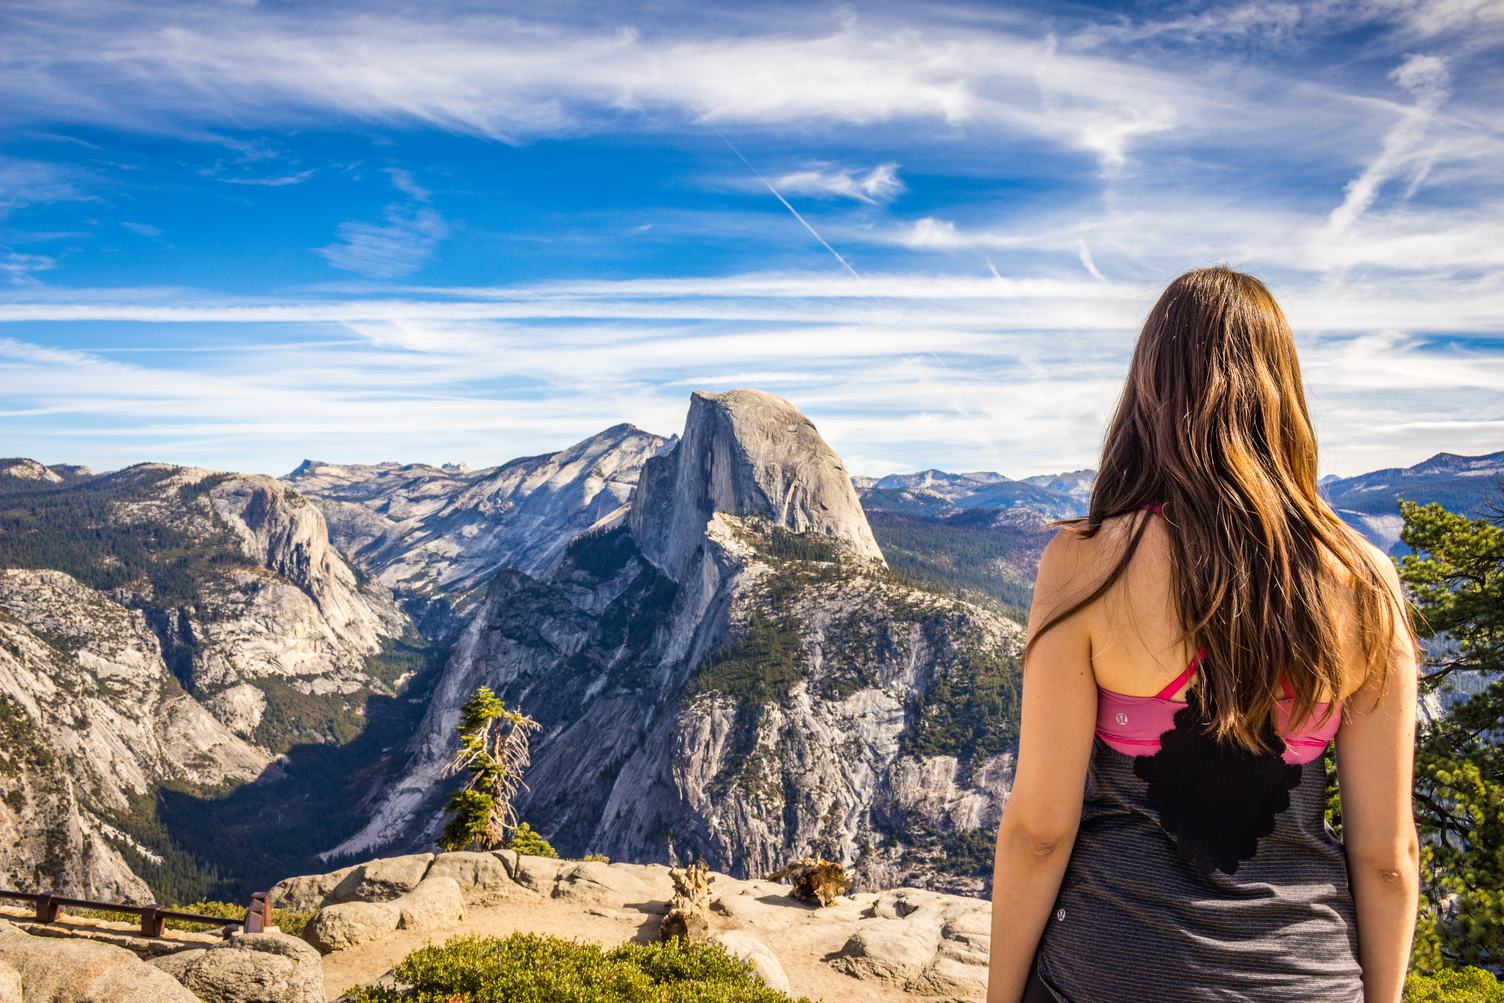 Young Brunette Looking at Half Dome, Yosemite Valley